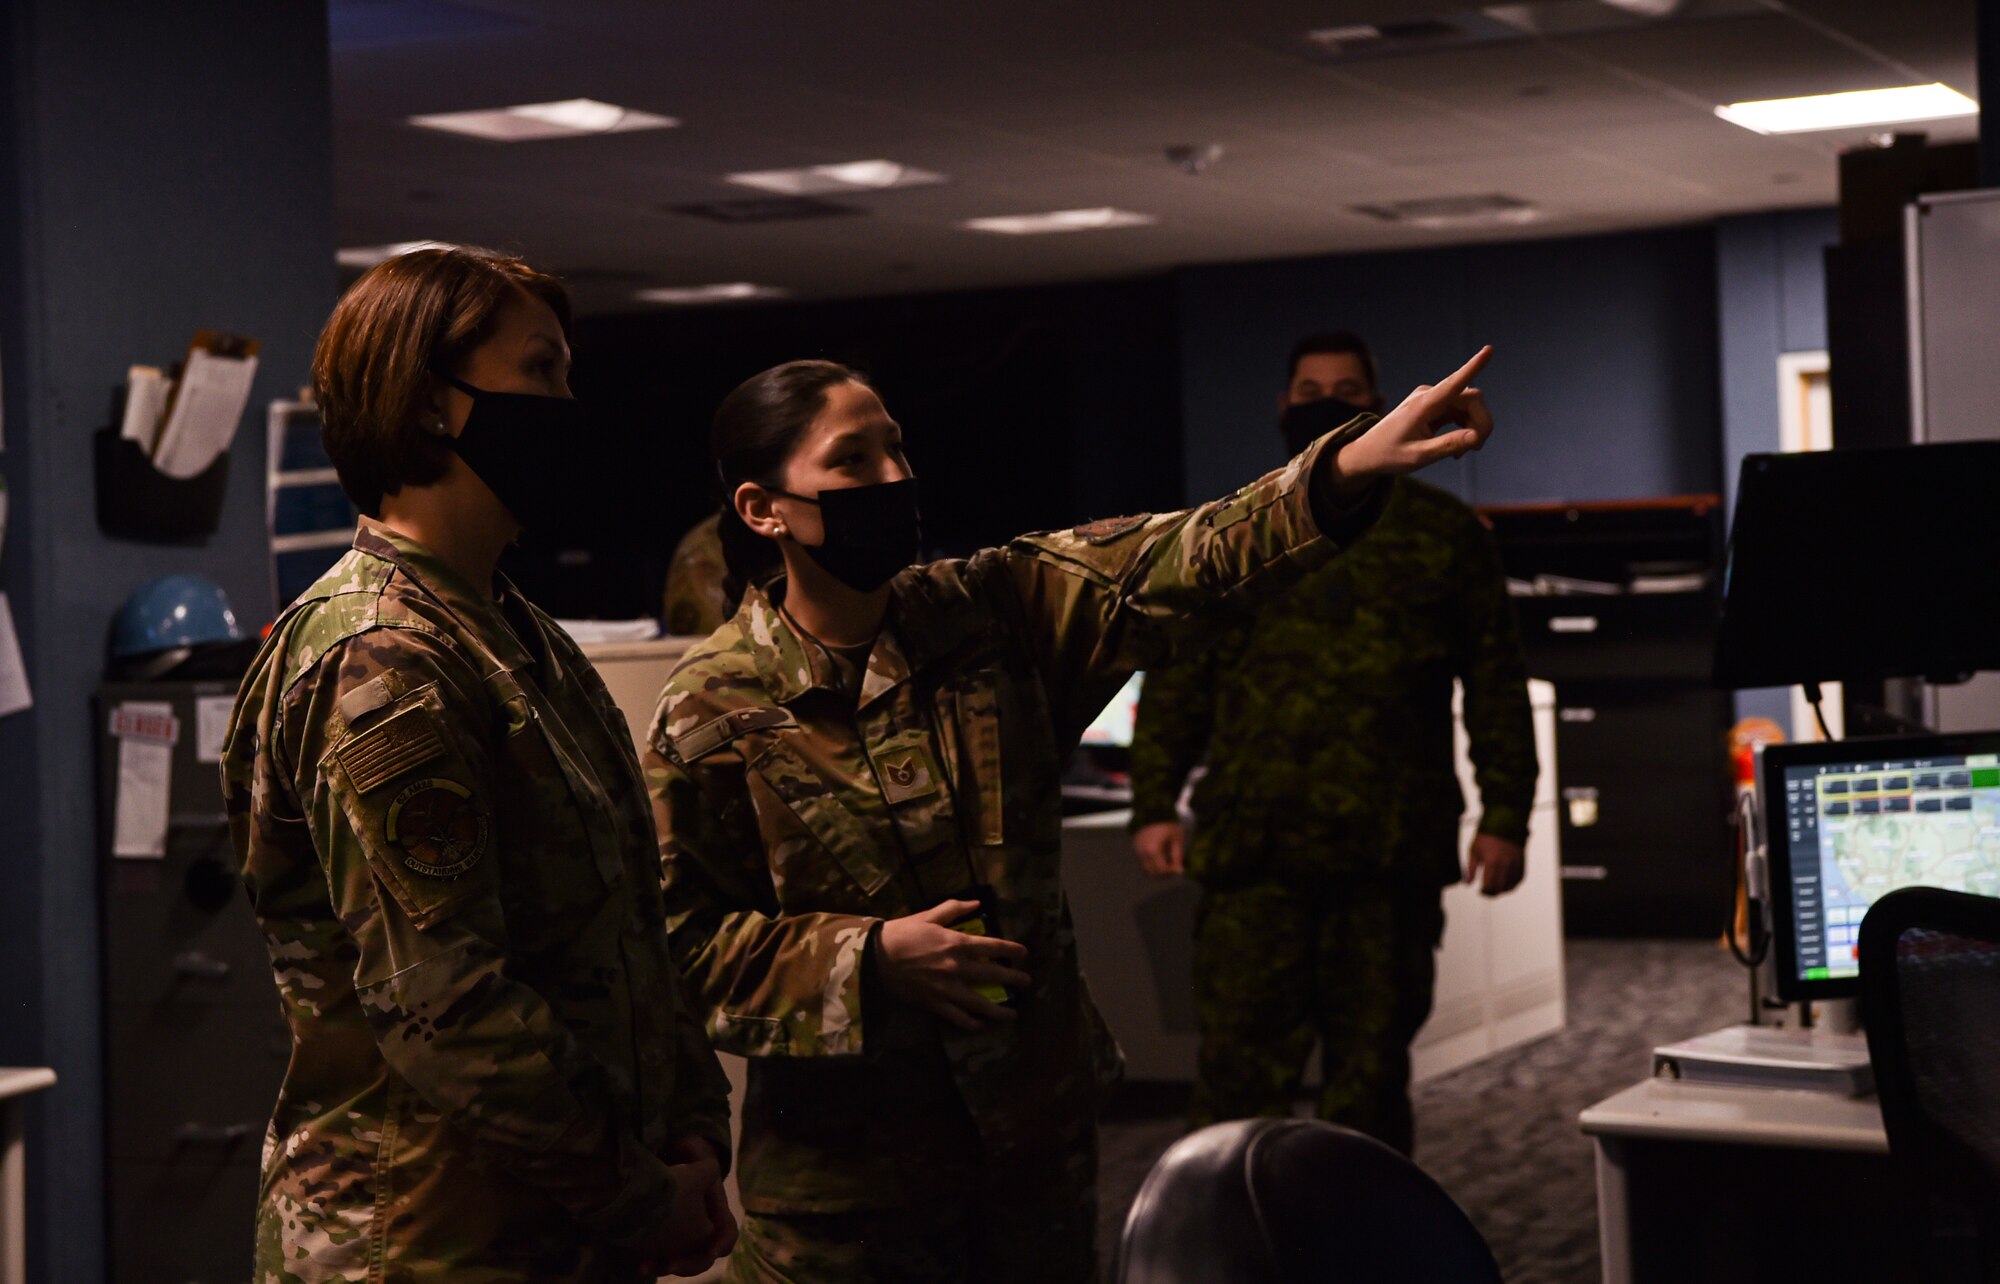 Chief Master Sergeant of the Air Force JoAnne S. Bass learns about the Western Air Defense Sector mission from Tech. Sgt. Michelle Lye, 225th Air Defense Squadron weapons director, from Tech. Sgt. Spencer Torres, 22nd Special Tactics Squadron radar airfield weather systems, during her visit to McChord Field at Joint Base Lewis-McChord, Washington, Feb. 1, 2022. Bass toured several McChord units and recognized Airmen for excellent performance. (U.S. Air Force photo by Staff Sgt. Tryphena Mayhugh)